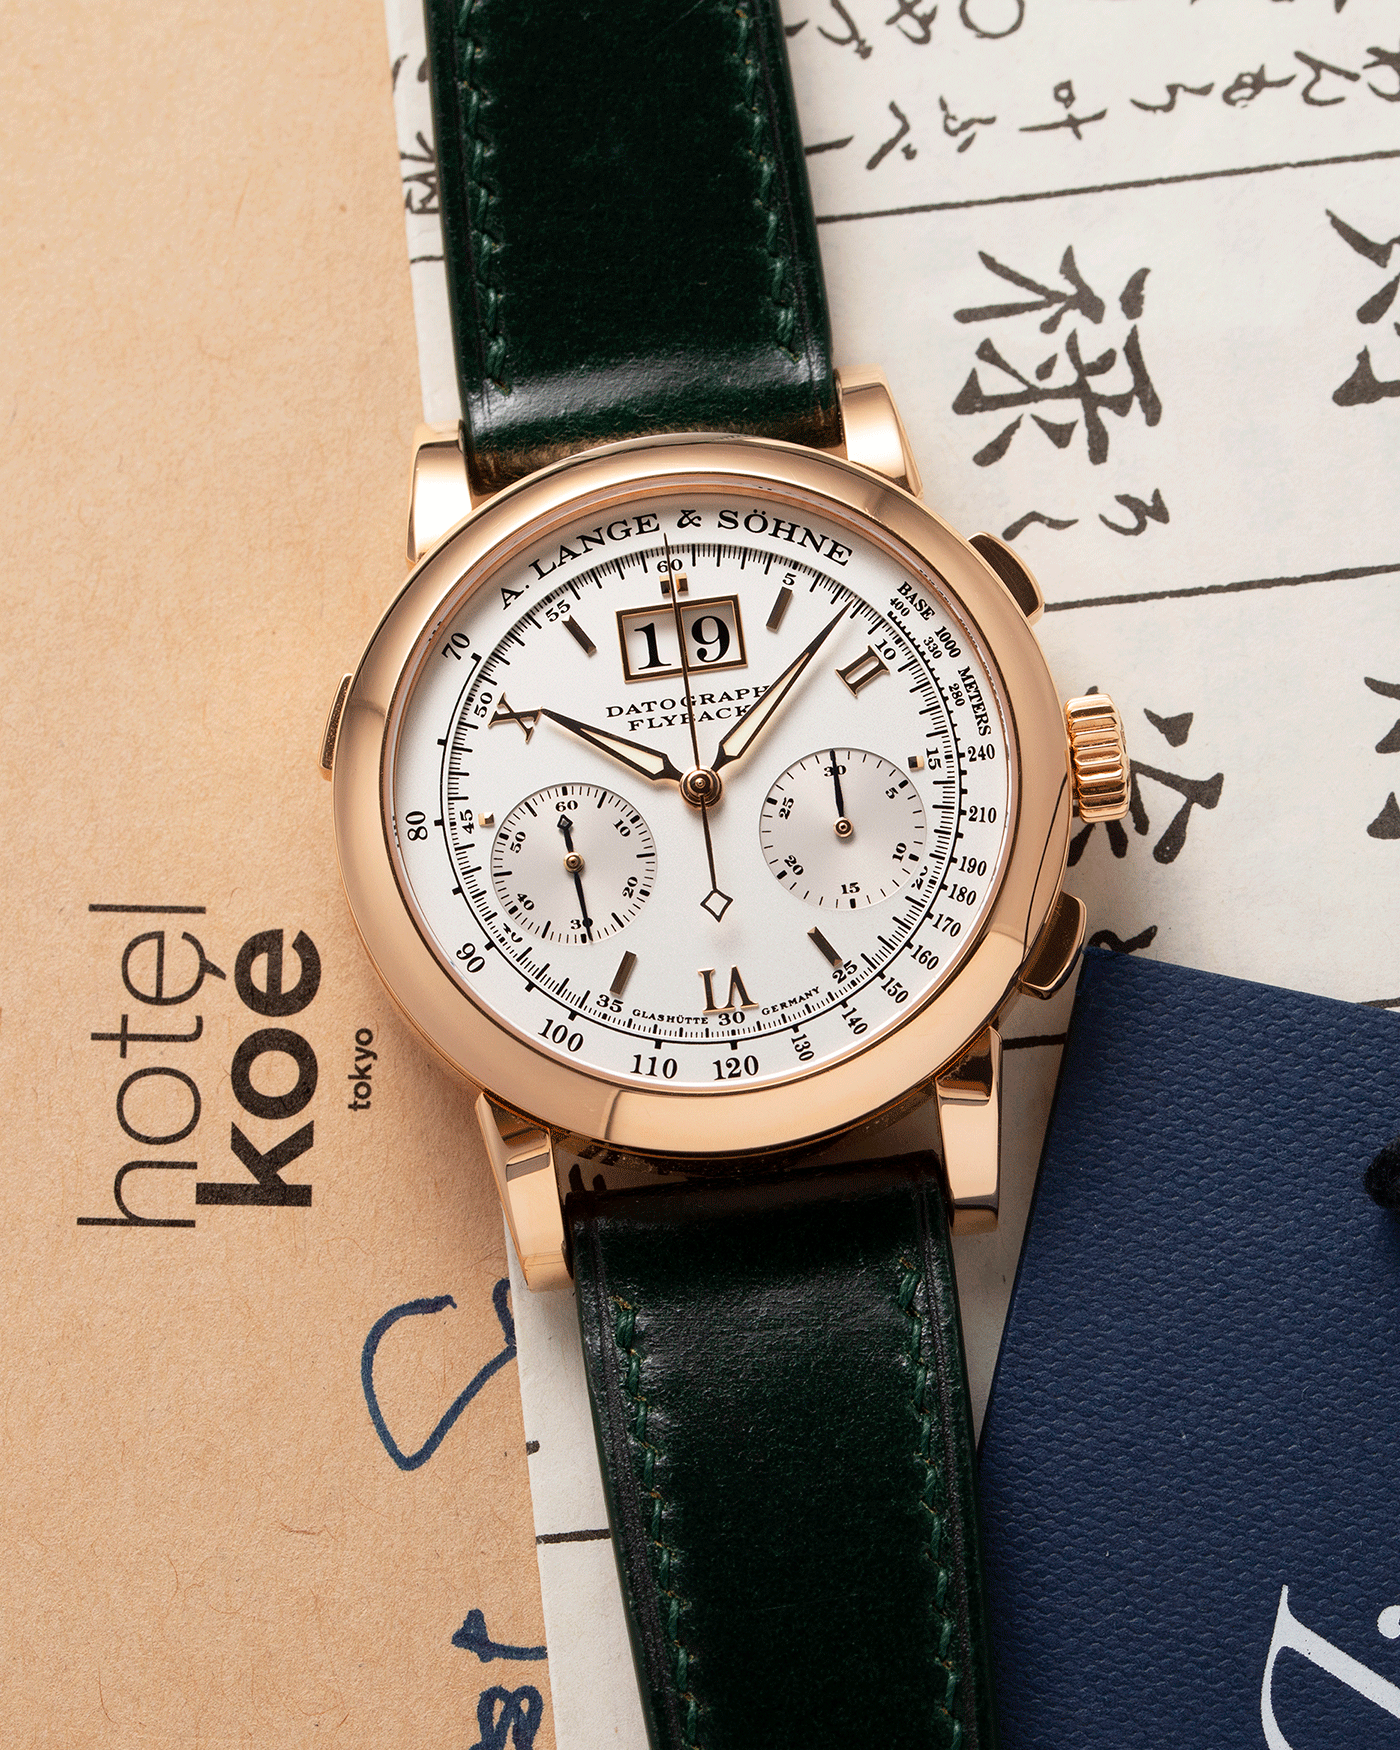 Brand: A. Lange & Sohne Year: 2009 Model: Datograph Reference Number: 403.032 Material: 18k Rose Gold Movement: Manual Winding L951.1 Case Diameter: 39mm Bracelet/Strap: Delugs Green Leather Strap with signed 18k Rose Gold Tang Buckle